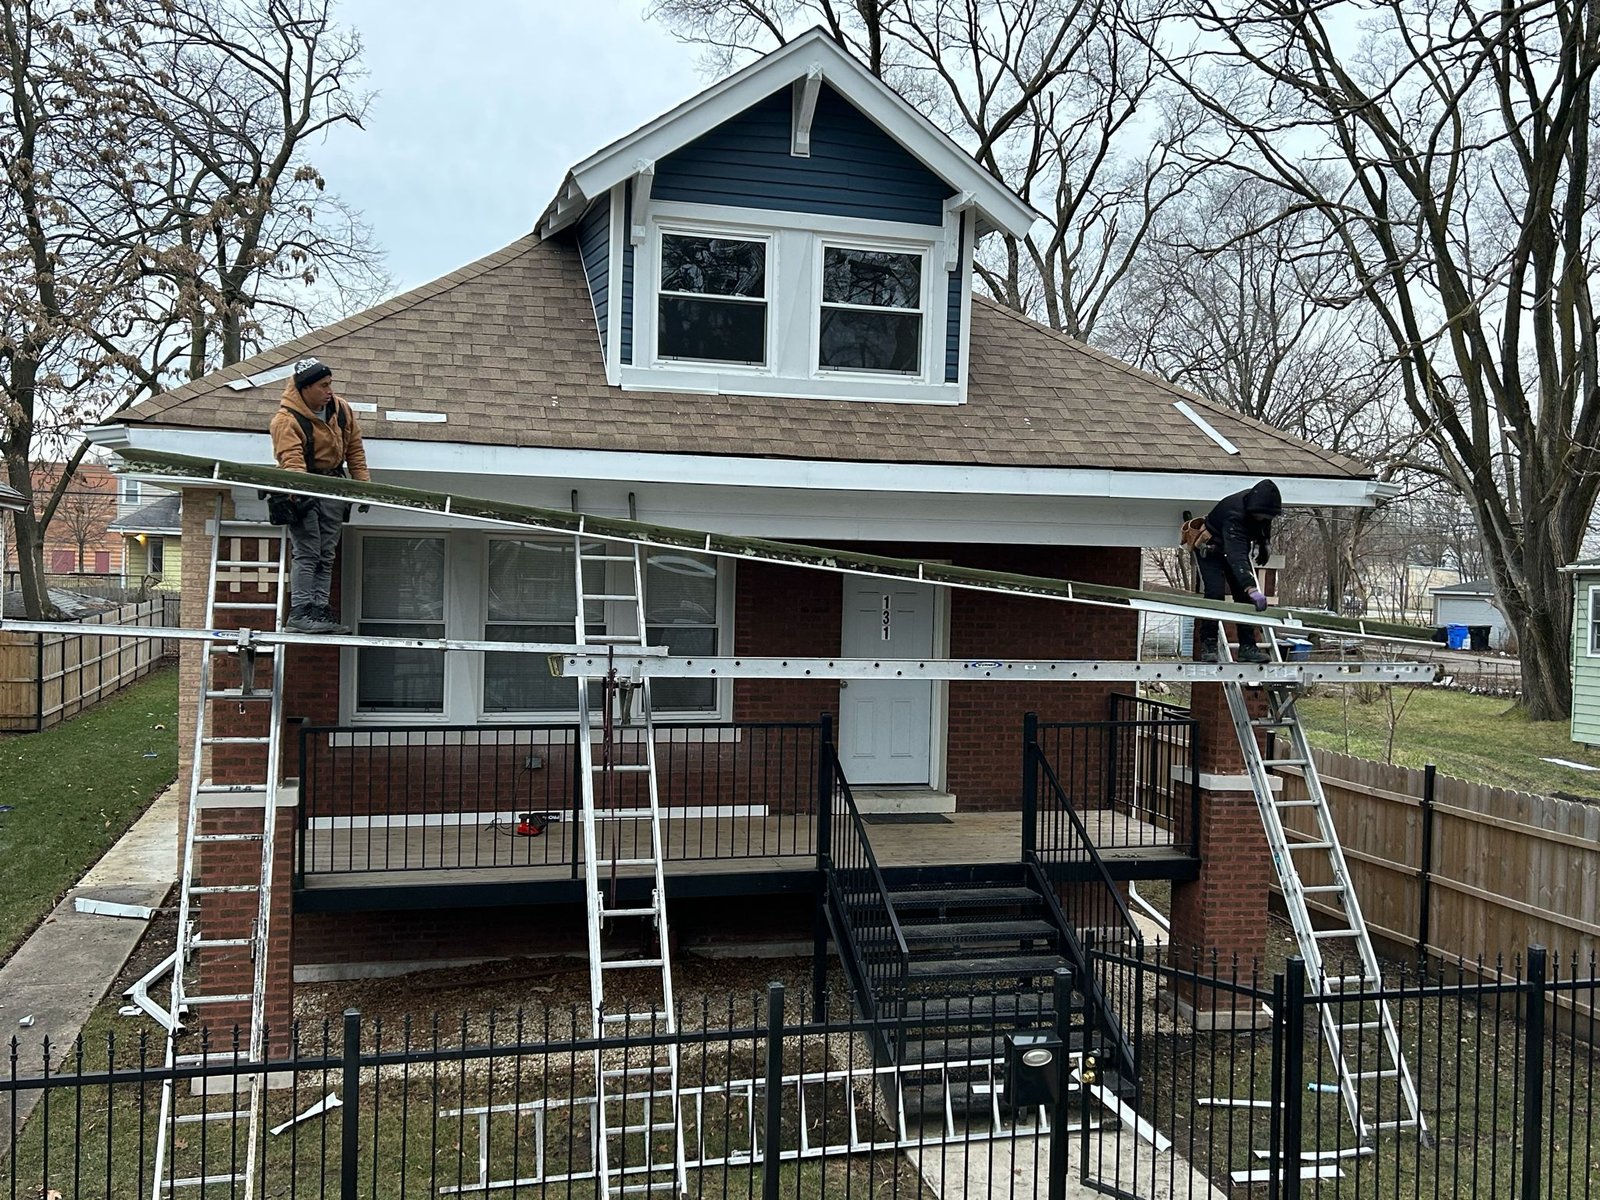 Gutter replacement in Chicago Area